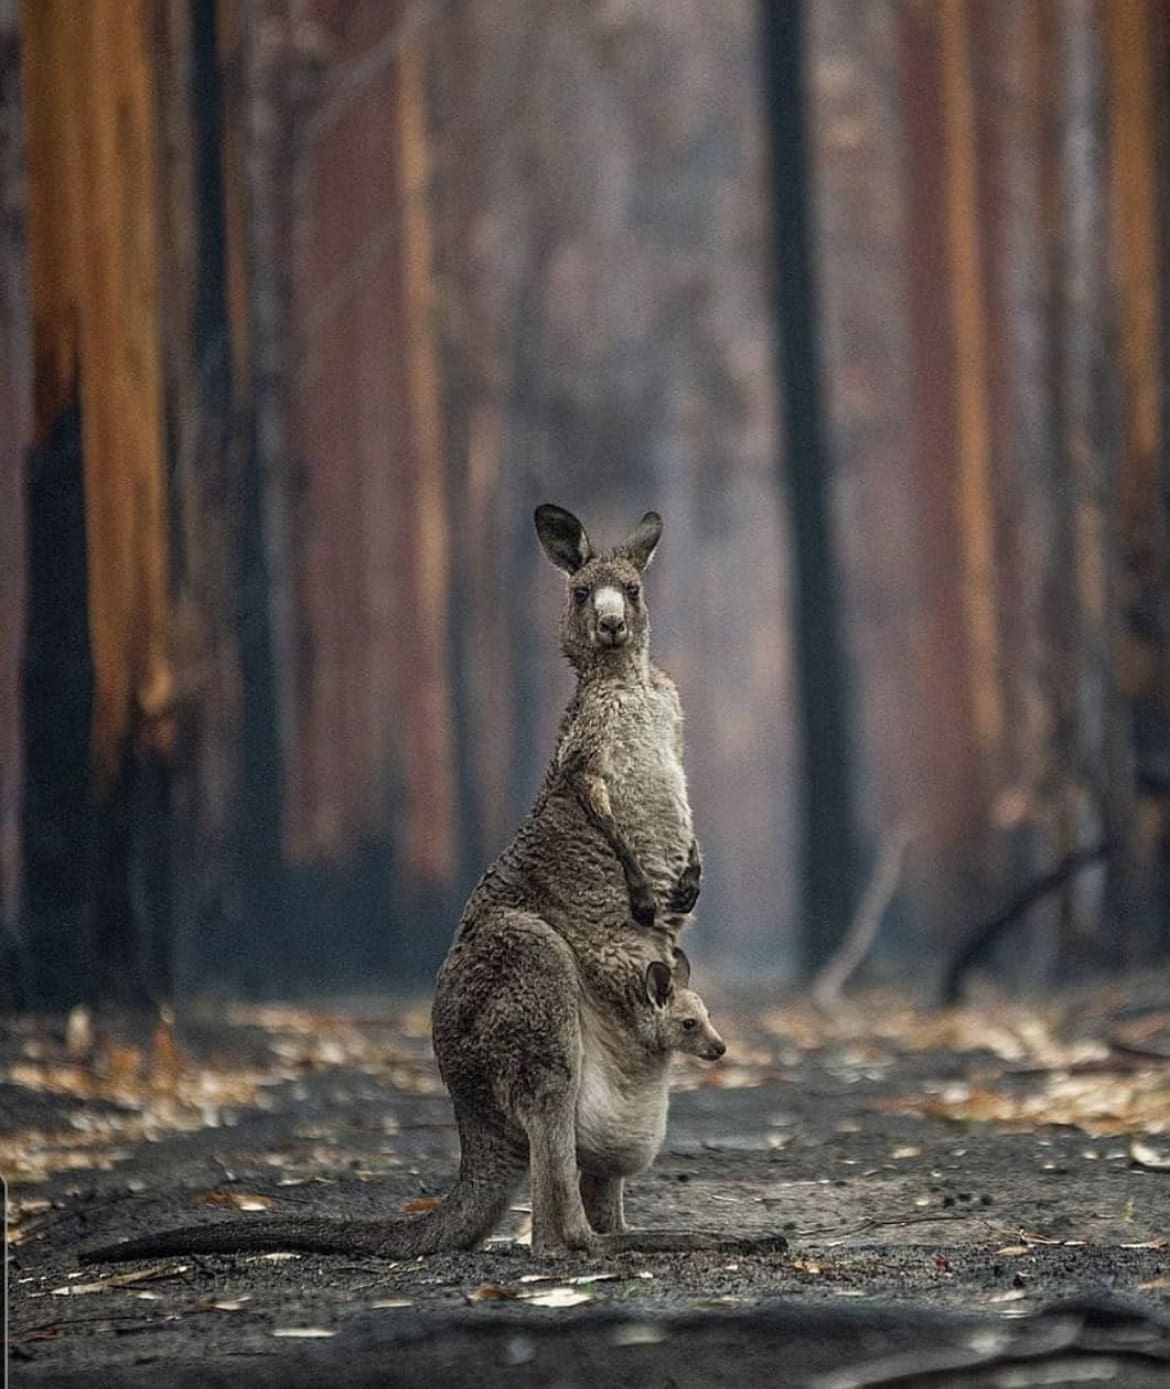 Eerie scenes in the remains of a burned Australian forest